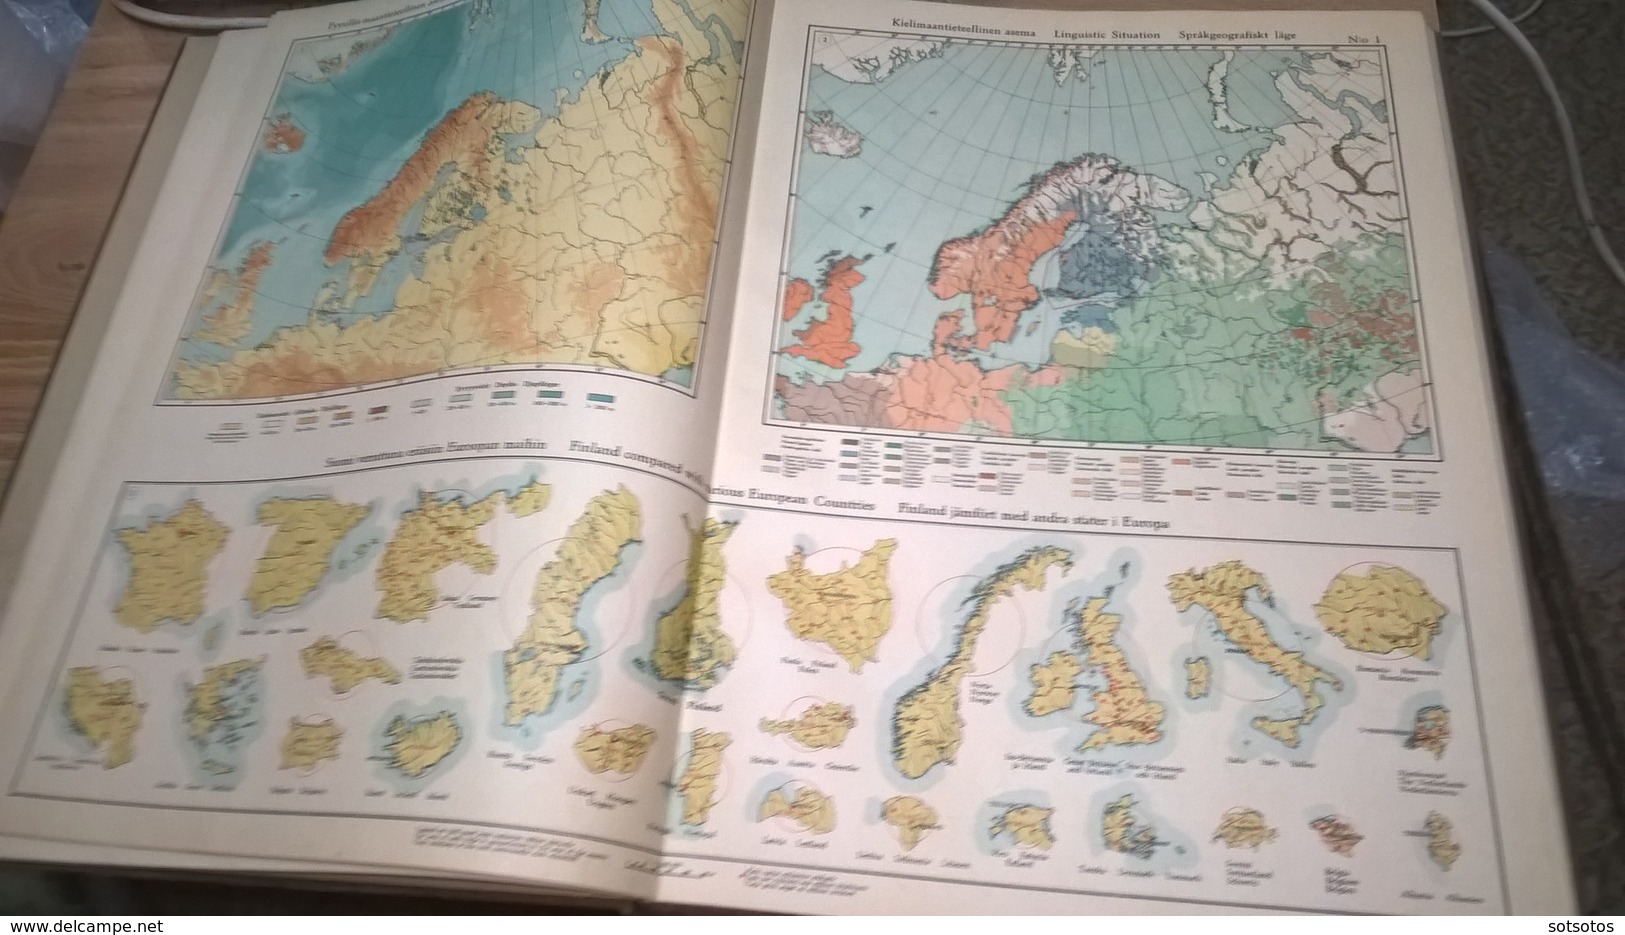 SUOMEN KARTASTO 1925 (ATLAS of FINLAND - ATLAS OVER FINLAND) - The GEOGRAPHICAL SOCIETY of FINLAND - 160PGS (8+38X4) -